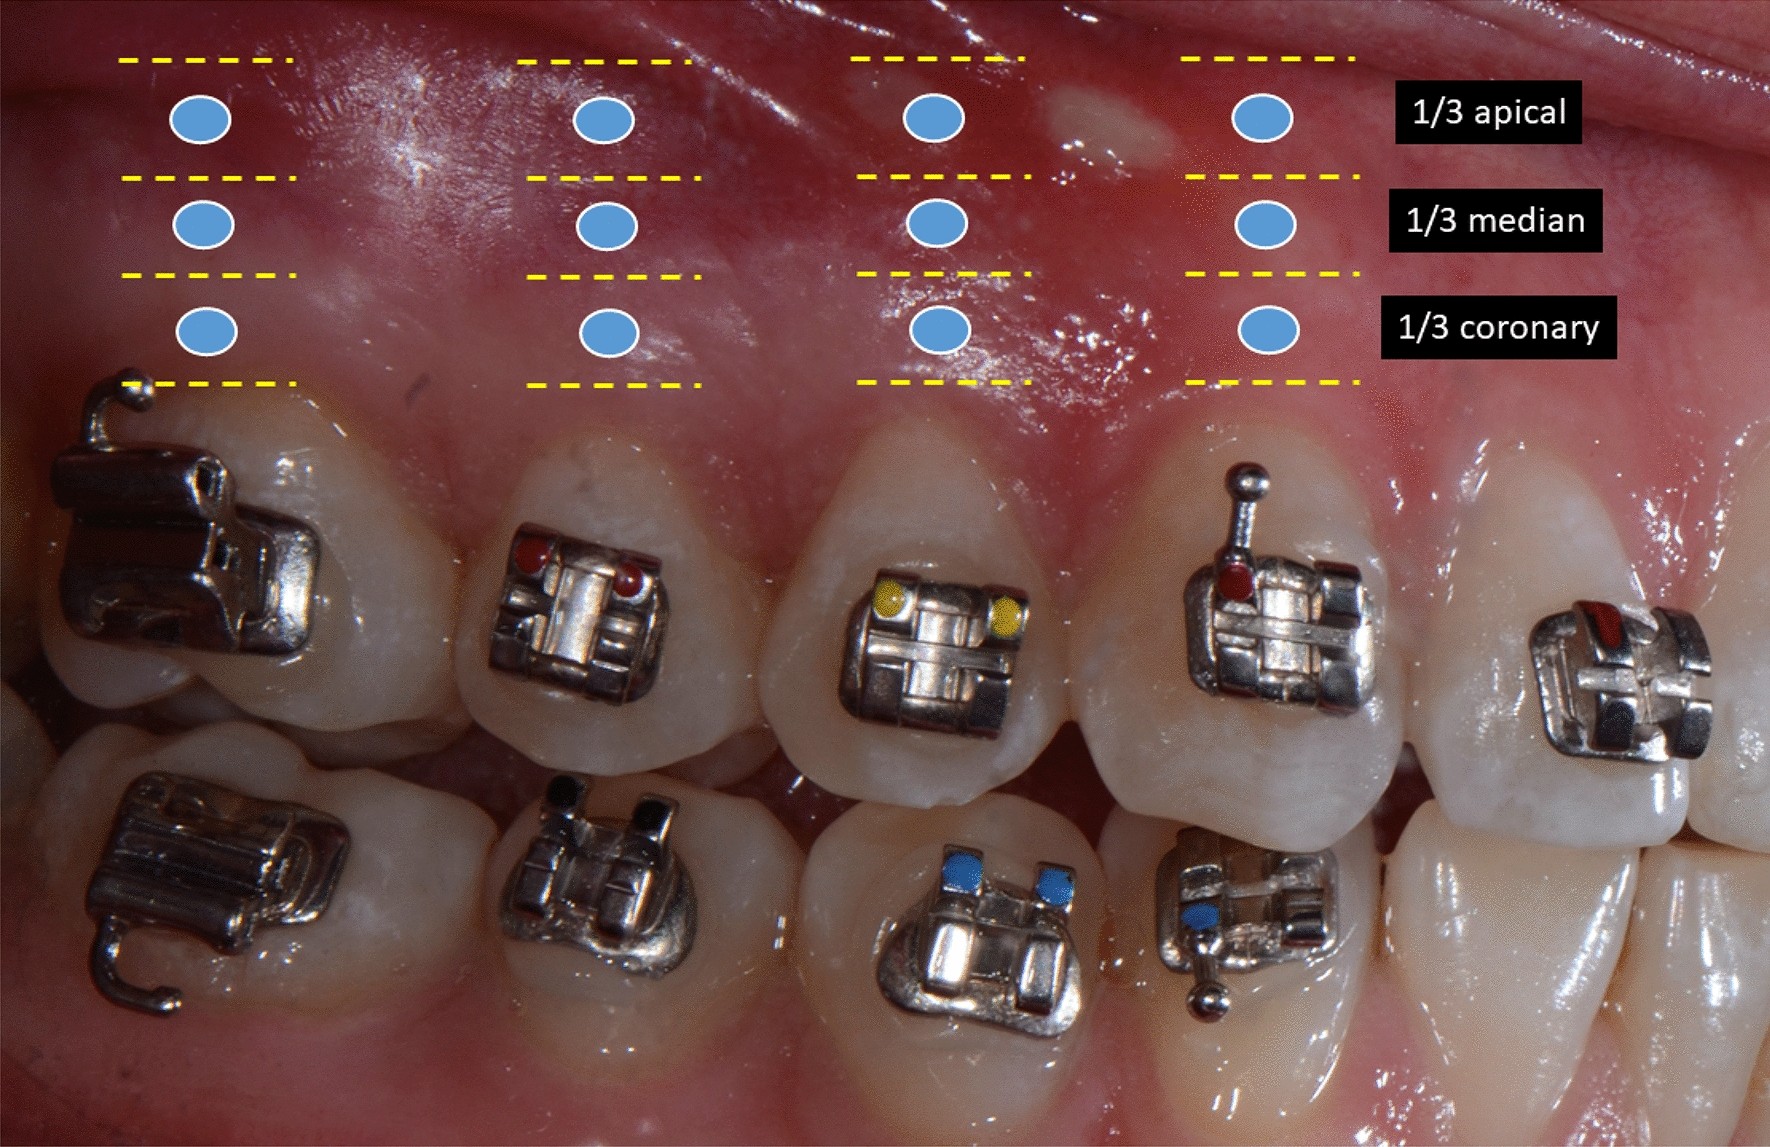 Effect of 970 nm low-level laser therapy on orthodontic tooth movement  during Class II intermaxillary elastics treatment: a RCT | Scientific  Reports